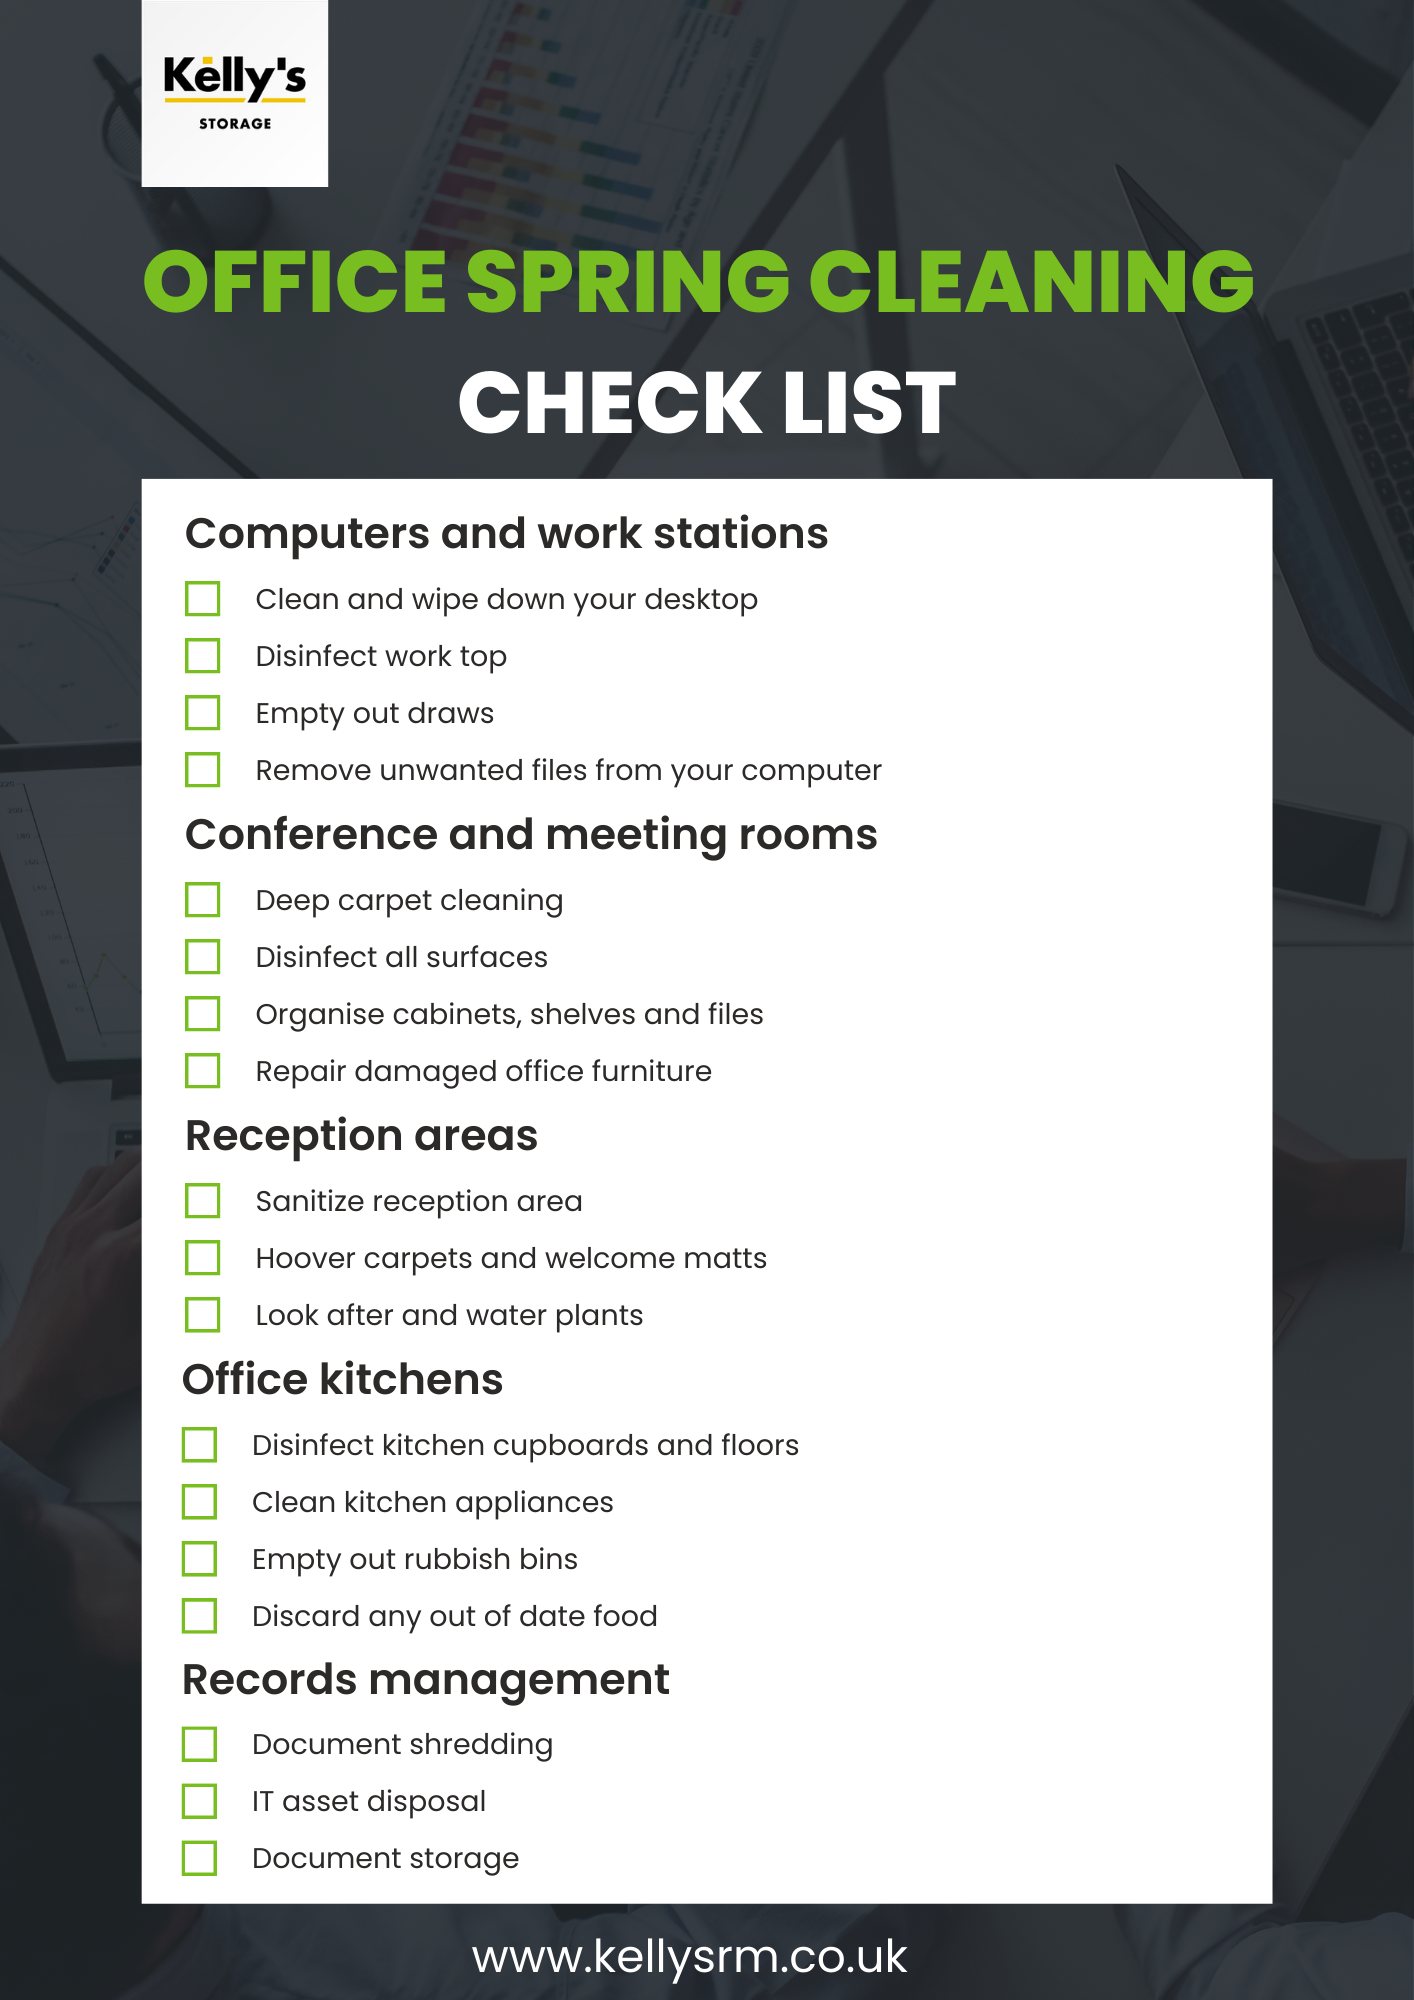 Office Spring Cleaning Checklist